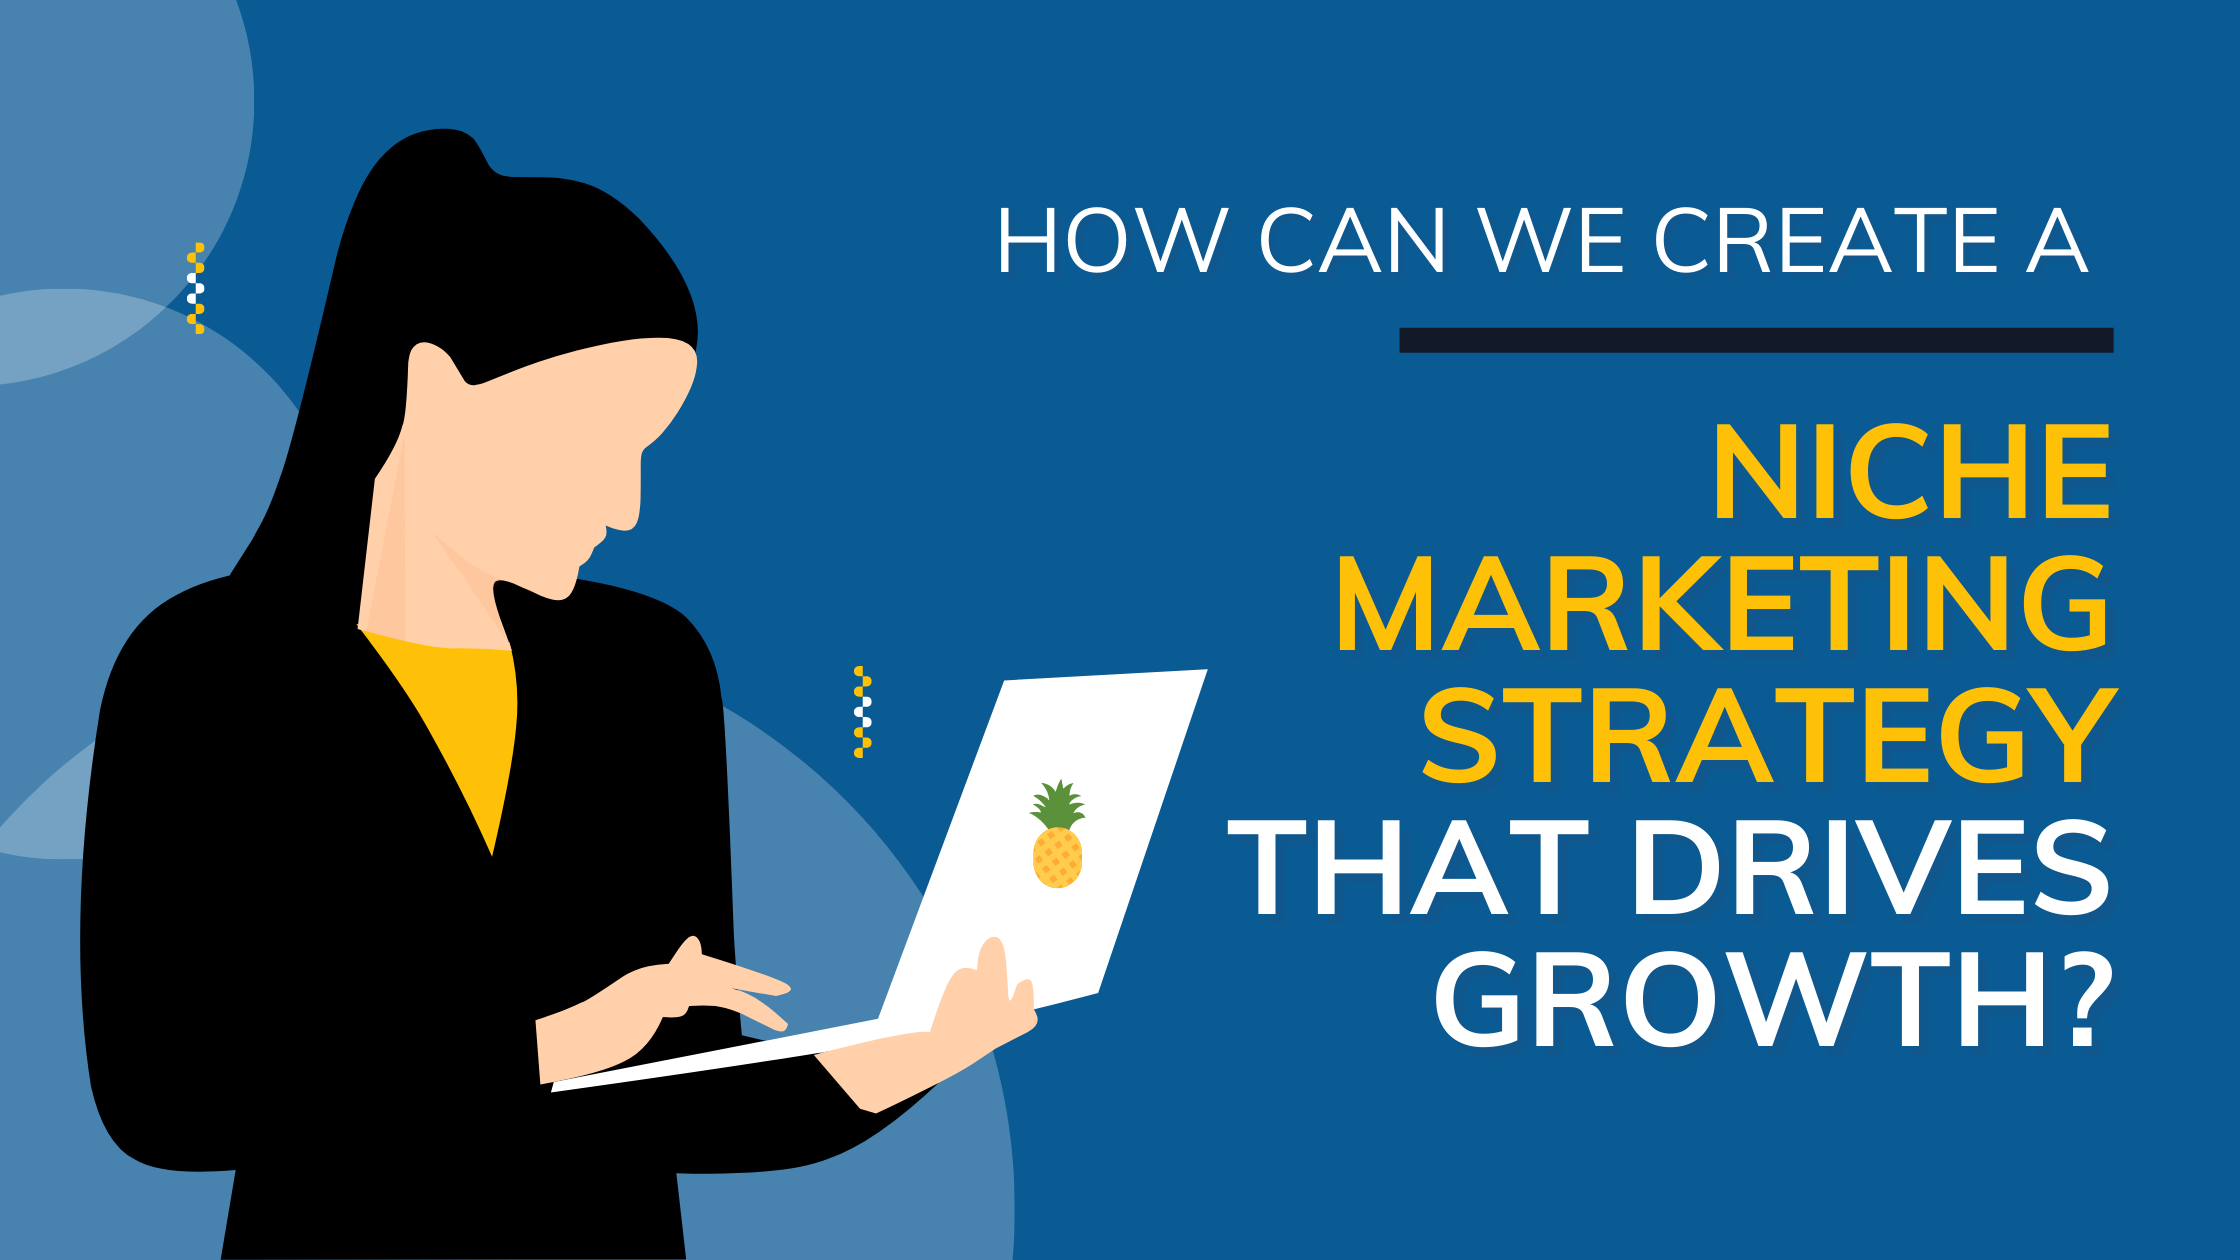 How Can We Create a Niche Marketing Strategy That Drives Growth?